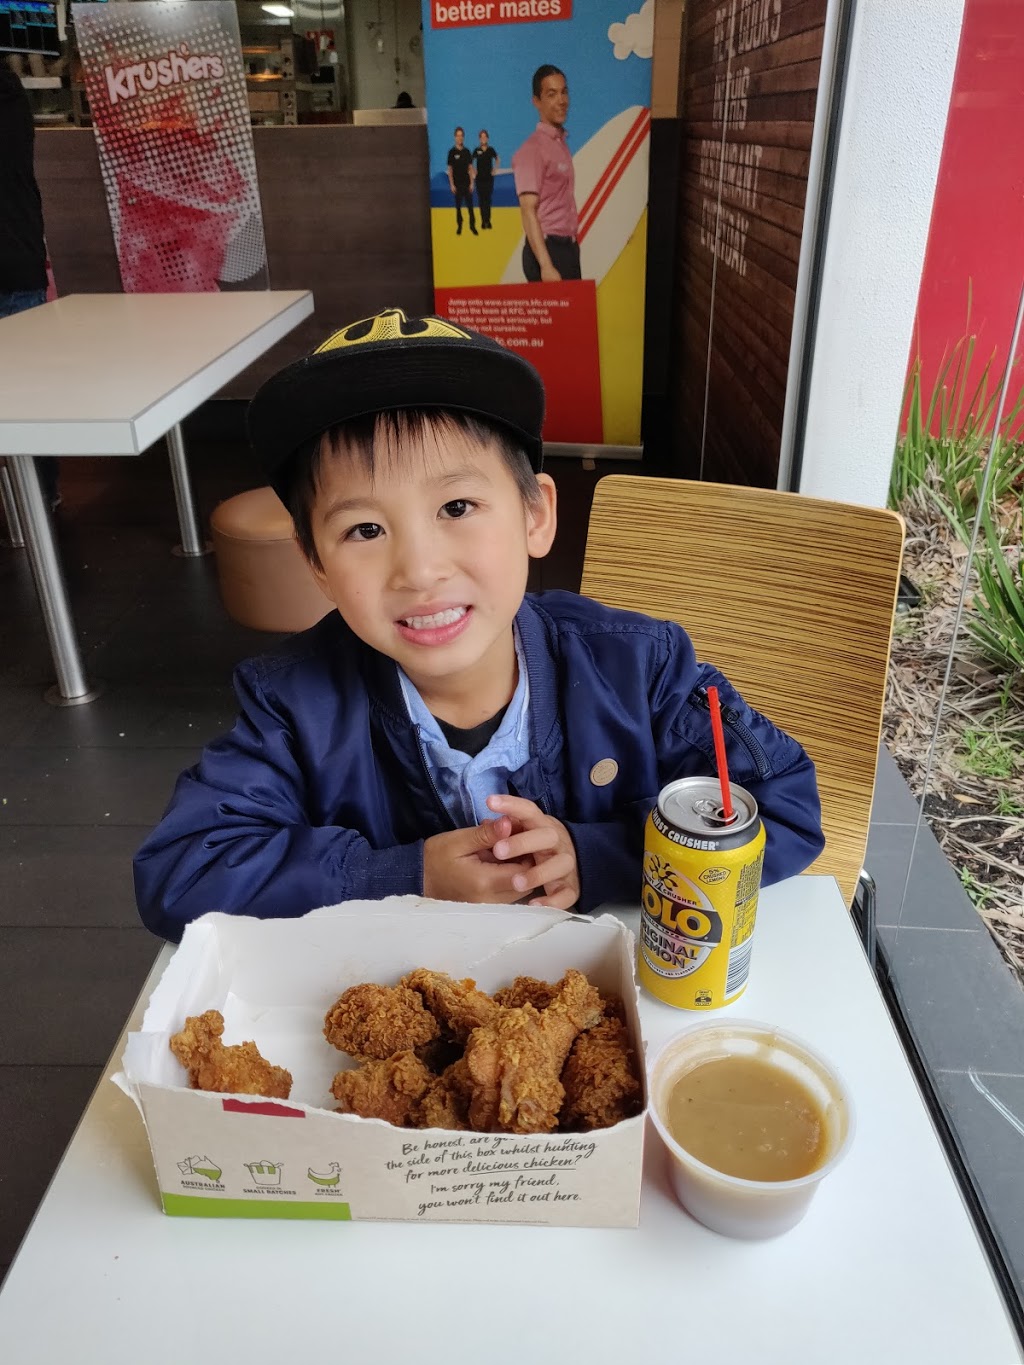 KFC Revesby | meal takeaway | 166 The River Rd, Revesby NSW 2212, Australia | 0297722241 OR +61 2 9772 2241